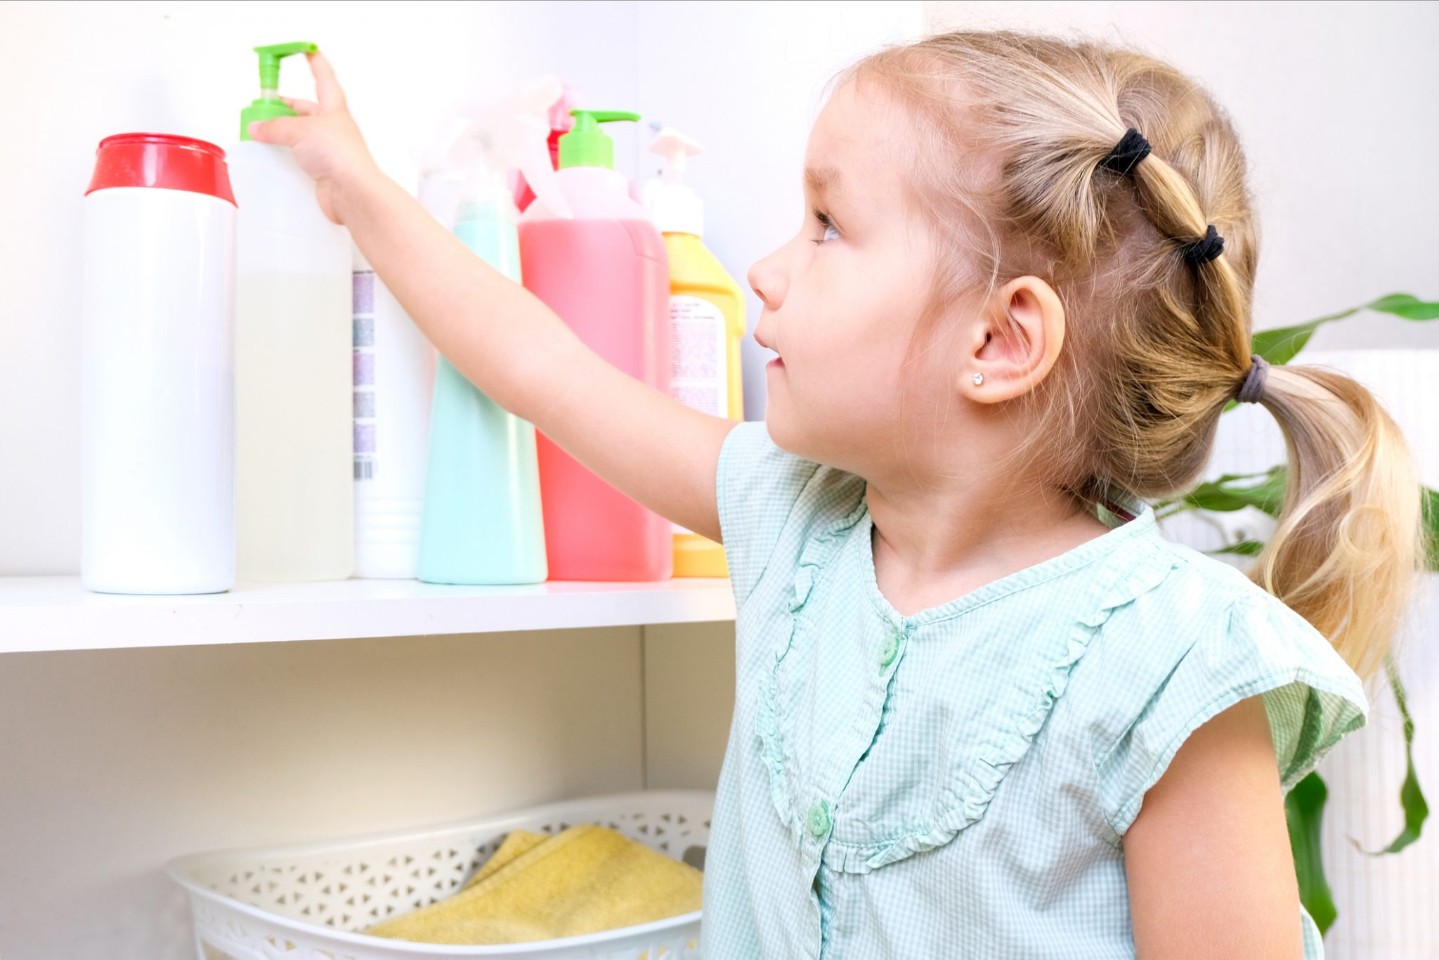 Toddler touches bottles of household chemicals, household cleaning products.